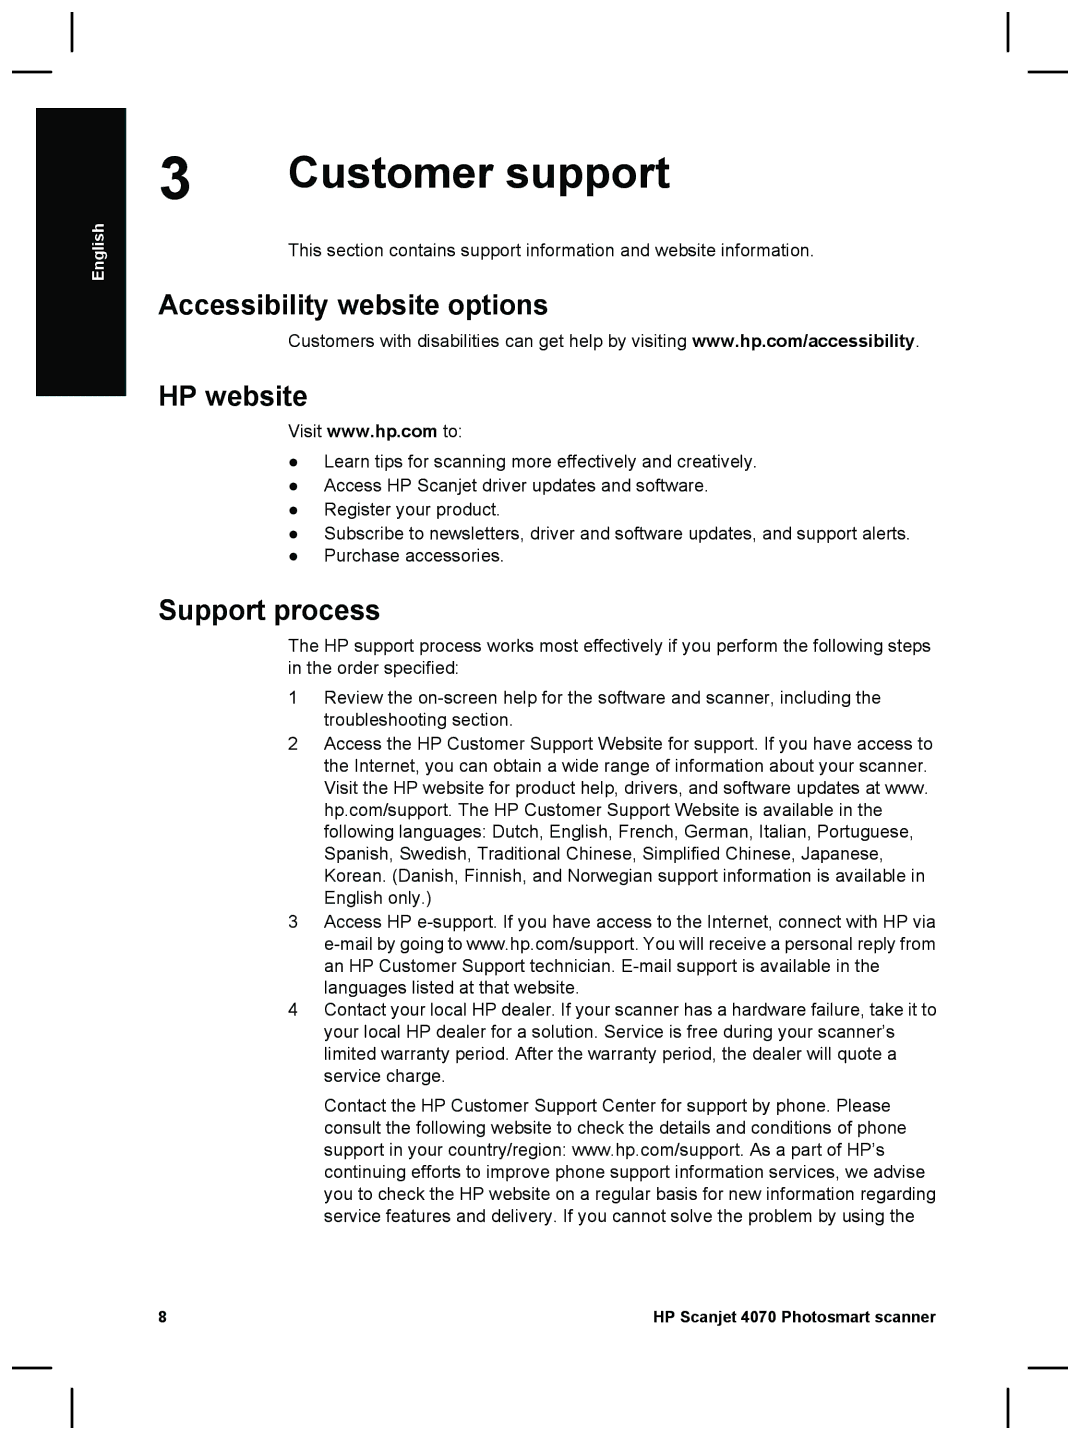 HP 4070 manual Customer support, Accessibility website options HP website, Support process 